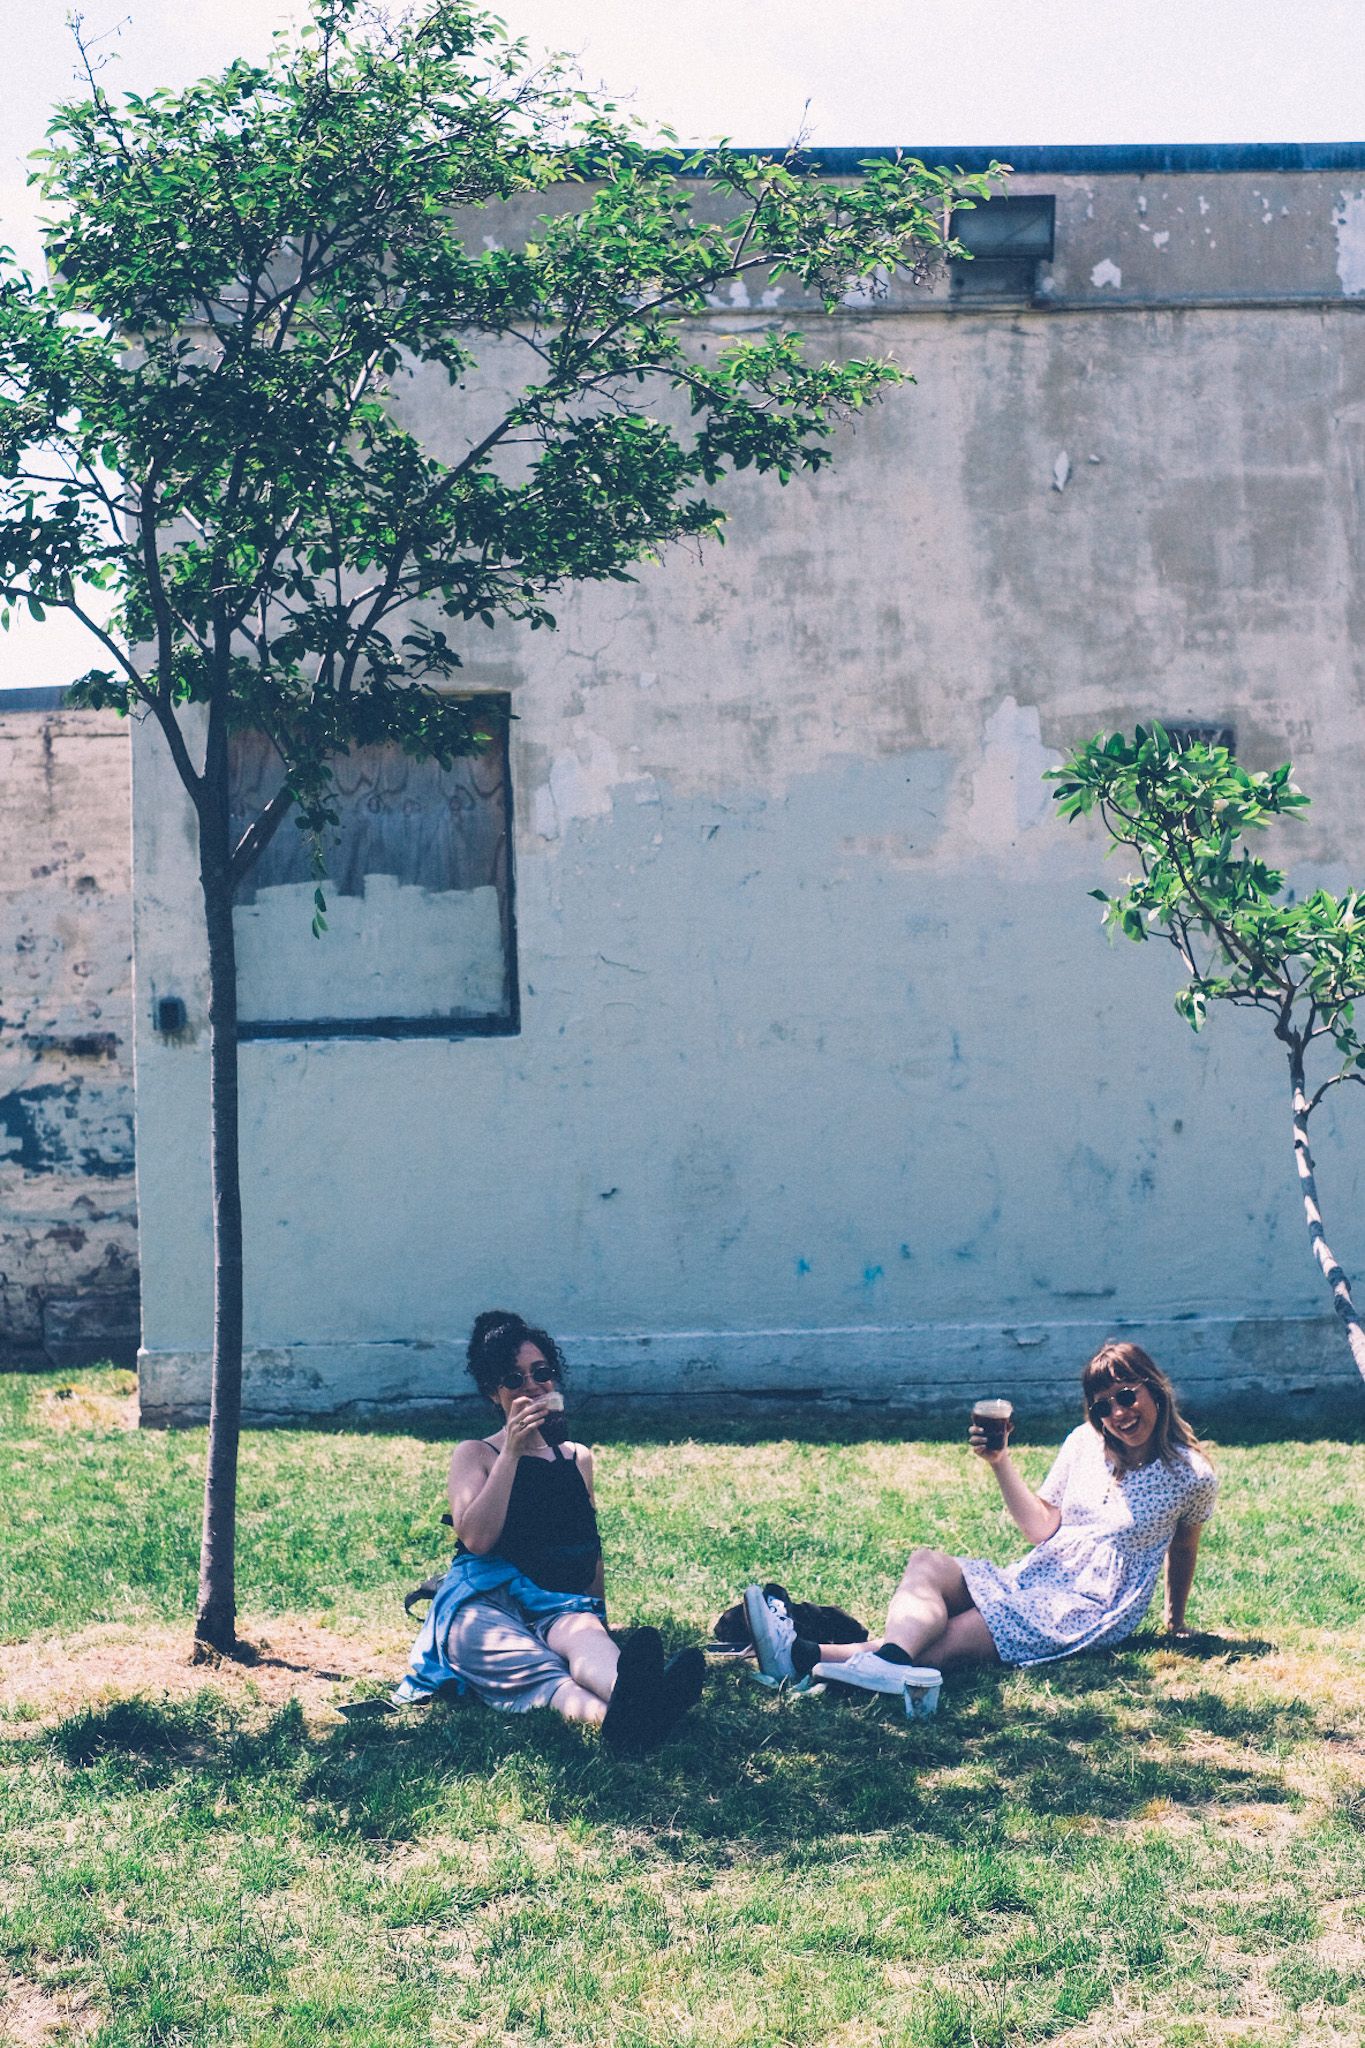 Two women sit in the grass, under small trees, in front of what looks to be an abandoned building. They are smiling.